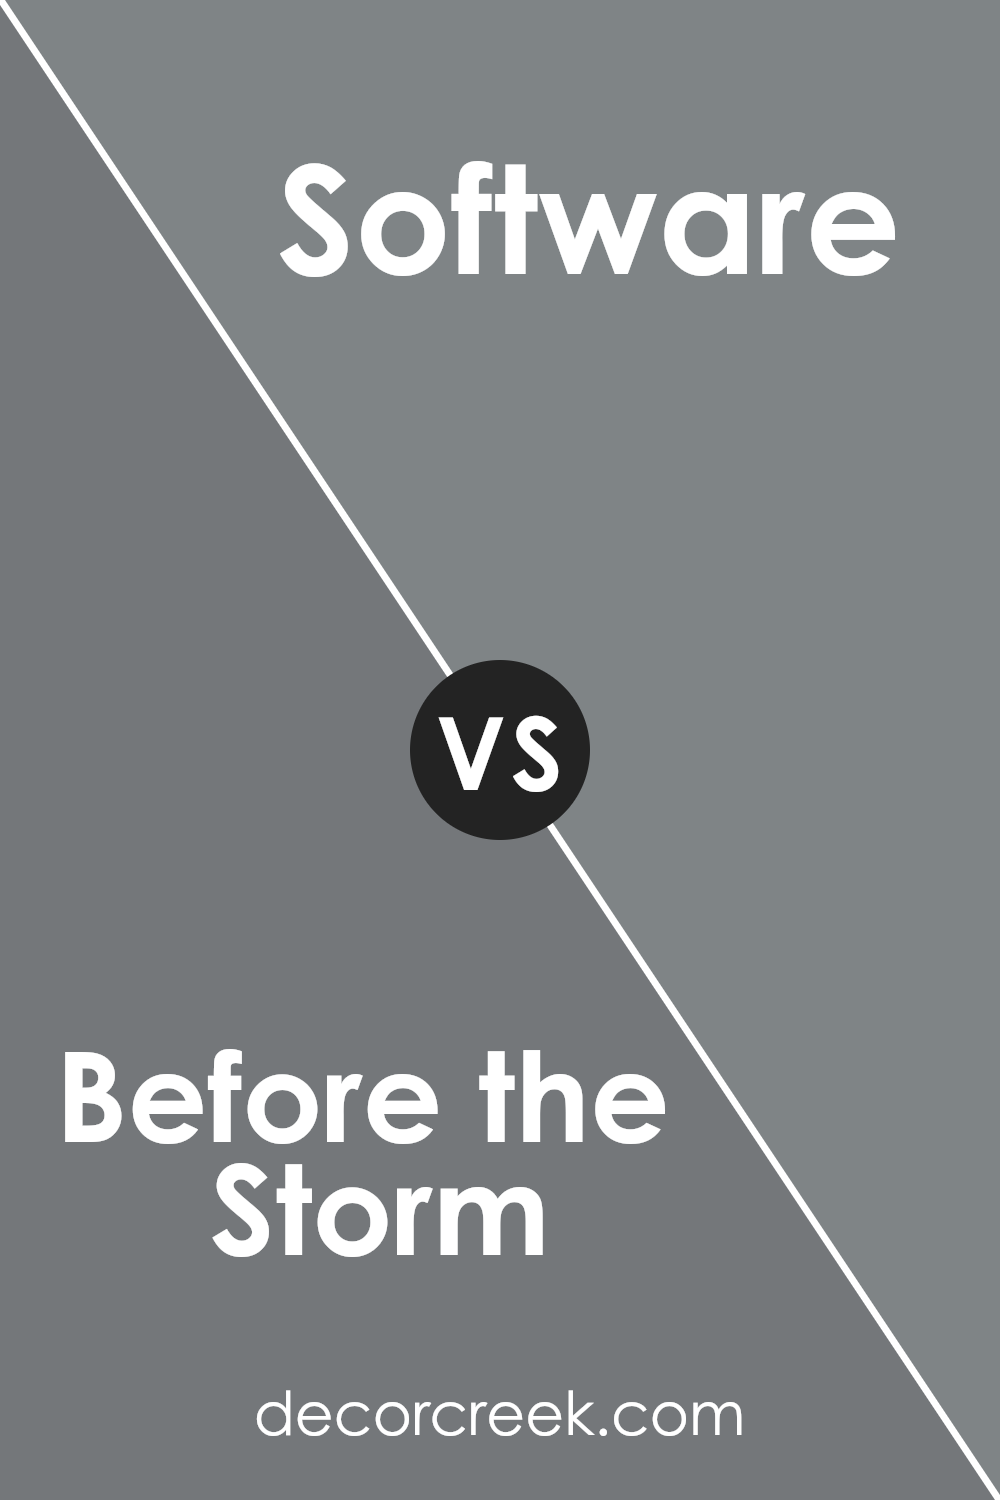 before_the_storm_sw_9564_vs_software_sw_7074